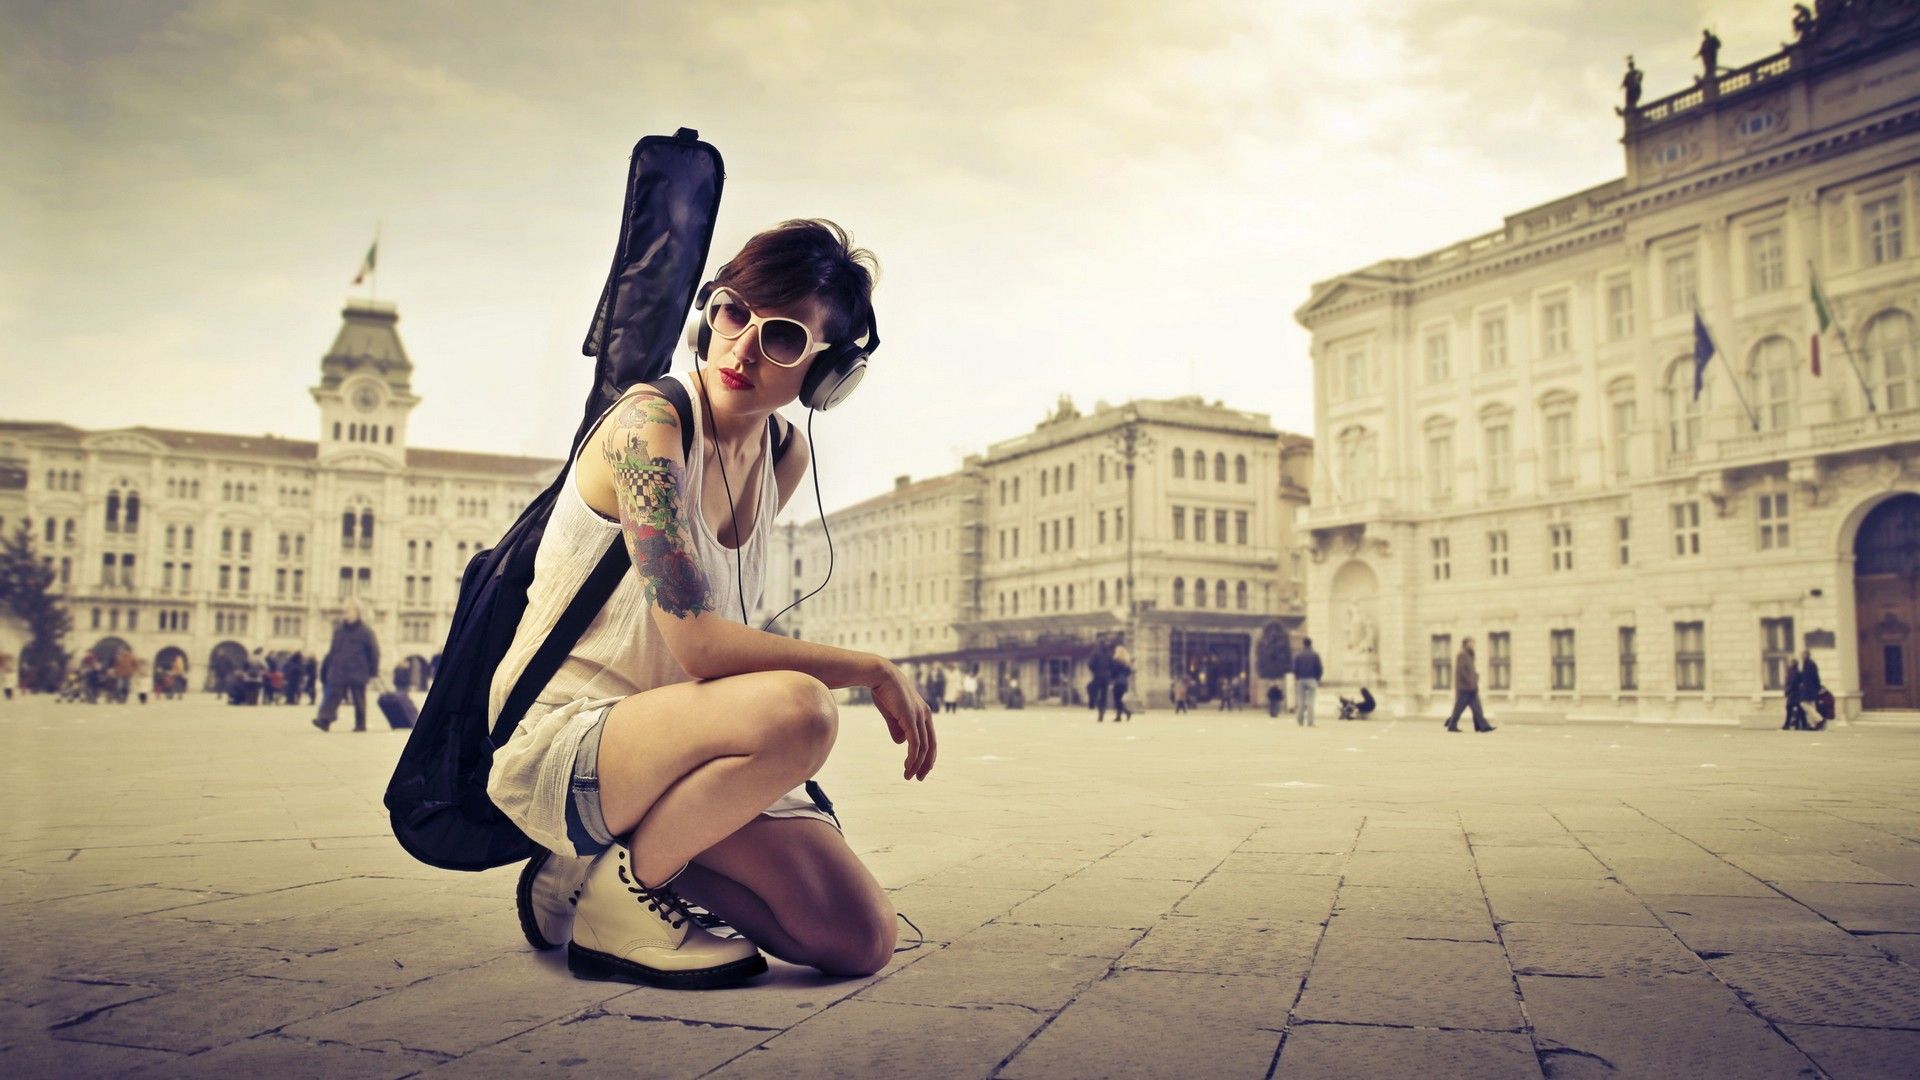 wallpaper of girl with guitar,leg,dance,street dance,photography,architecture